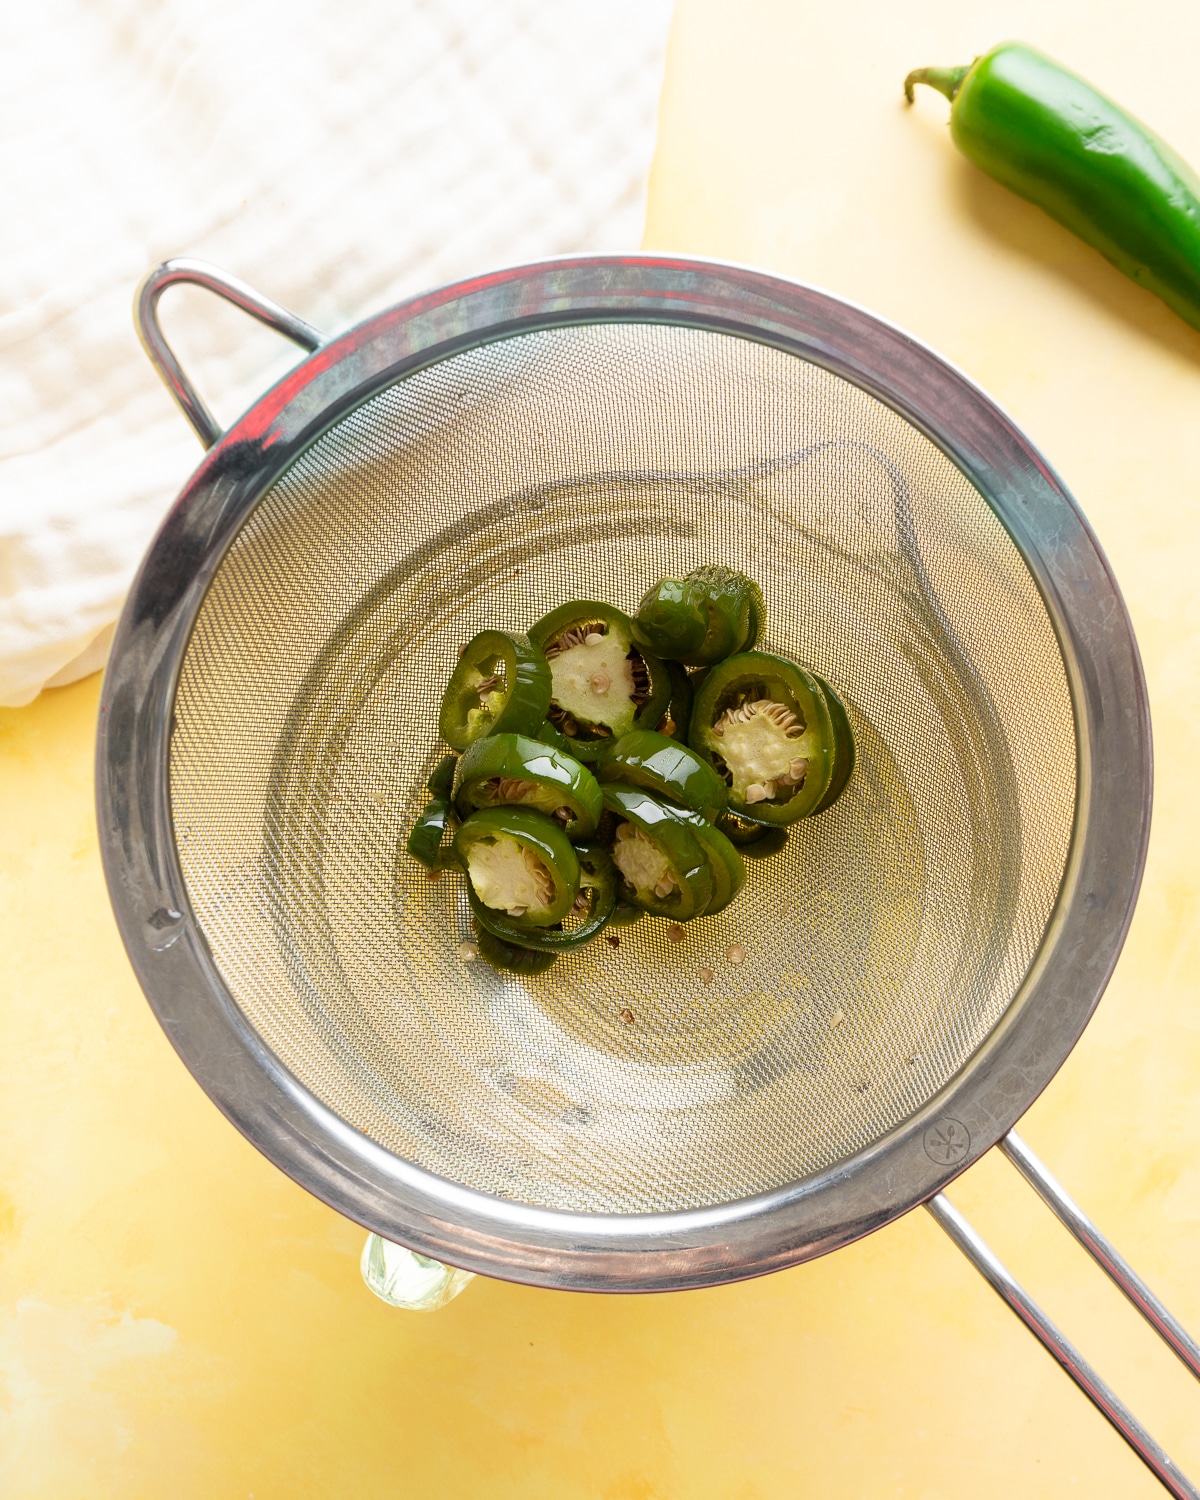 Jalapeno slices in a mesh strainer.